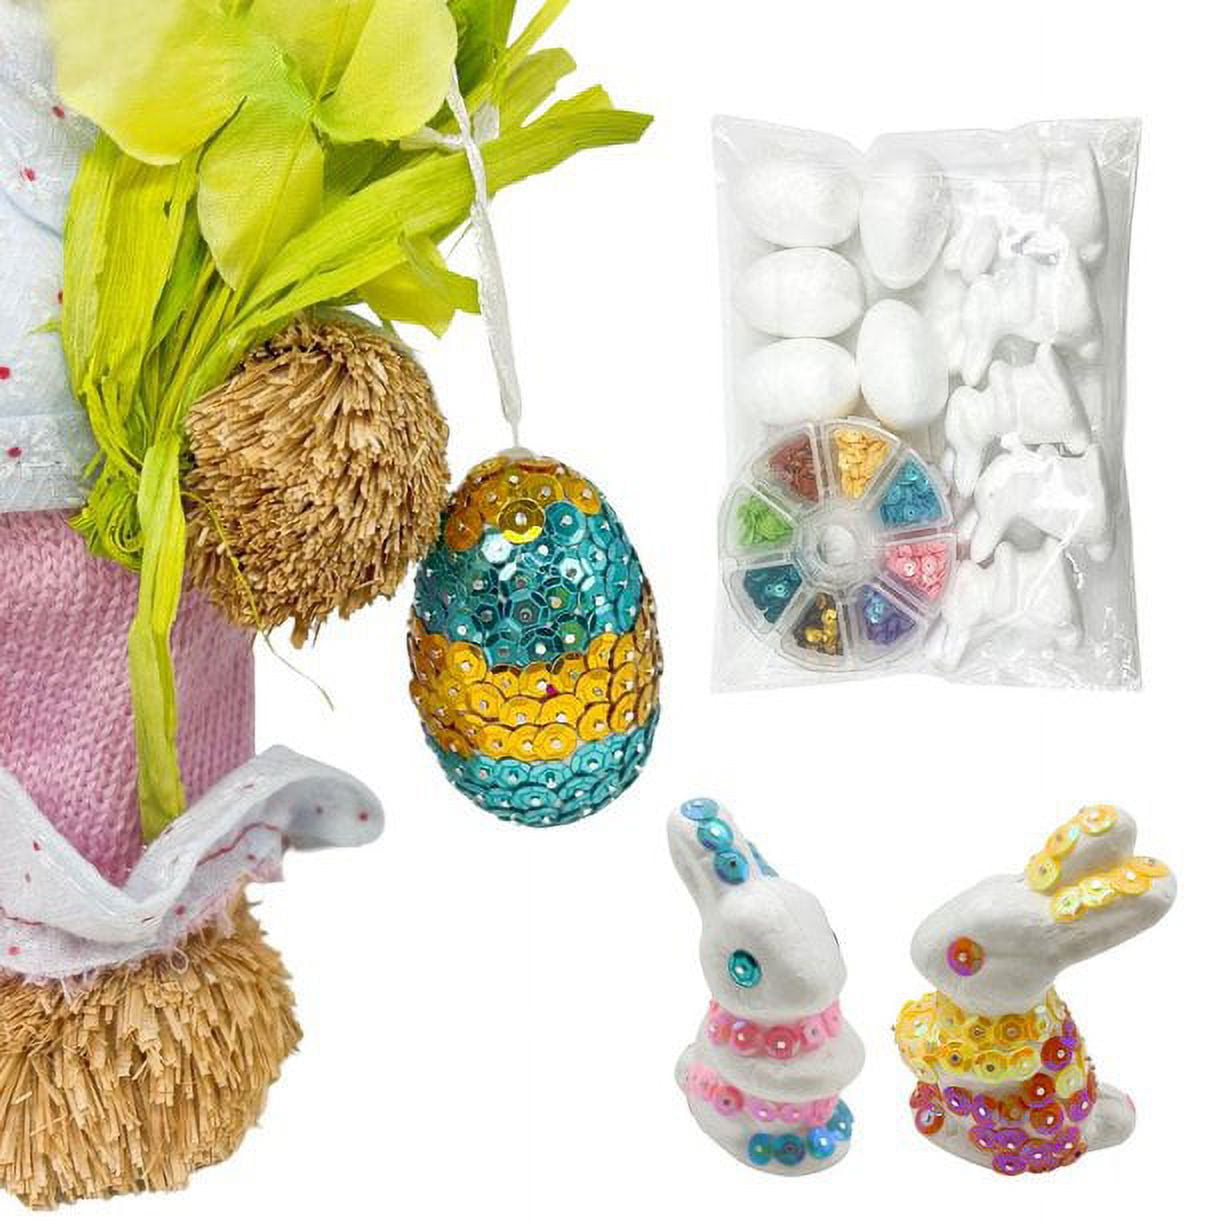 Easter crafts for adults and kids - make your own Easter Bunny! - Sequin Art